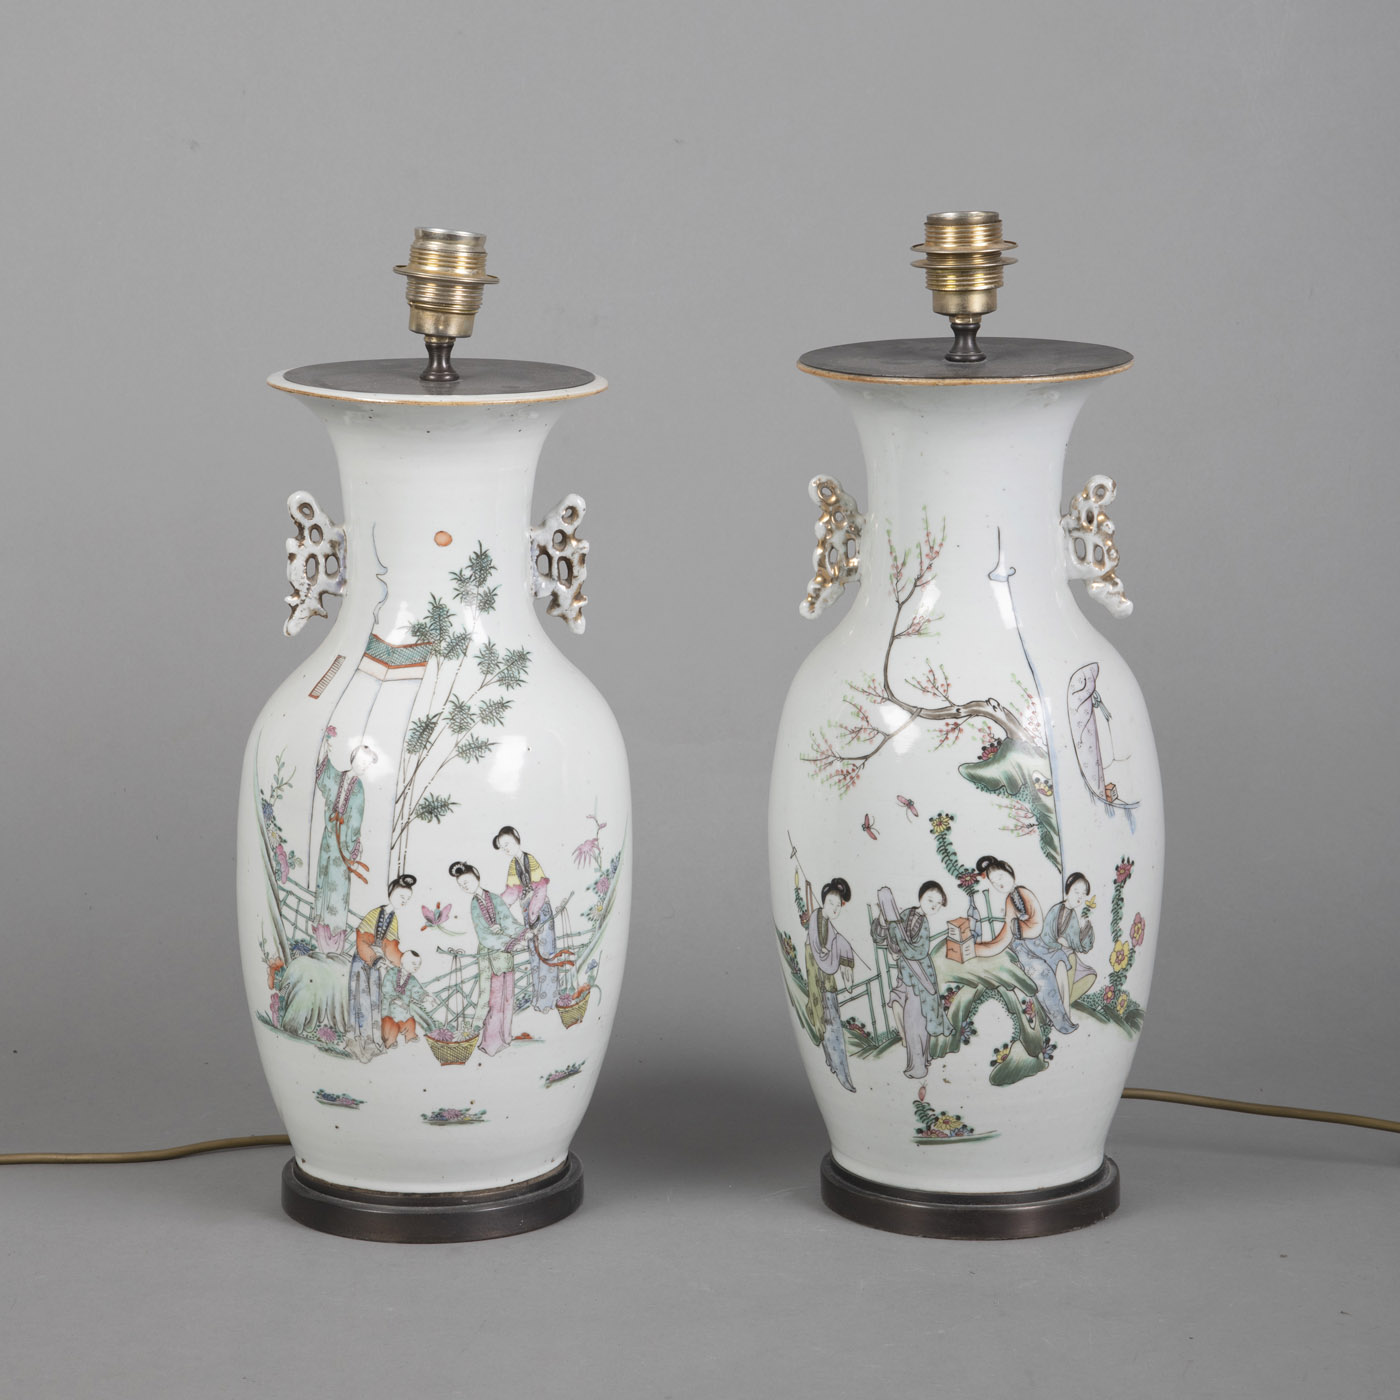 <b>A PAIR OF POLYCHROME PAINTED PORCELAIN VASES DEPICTING LADIES IN A GARDEN, MOUNTED AS LAMPS</b>